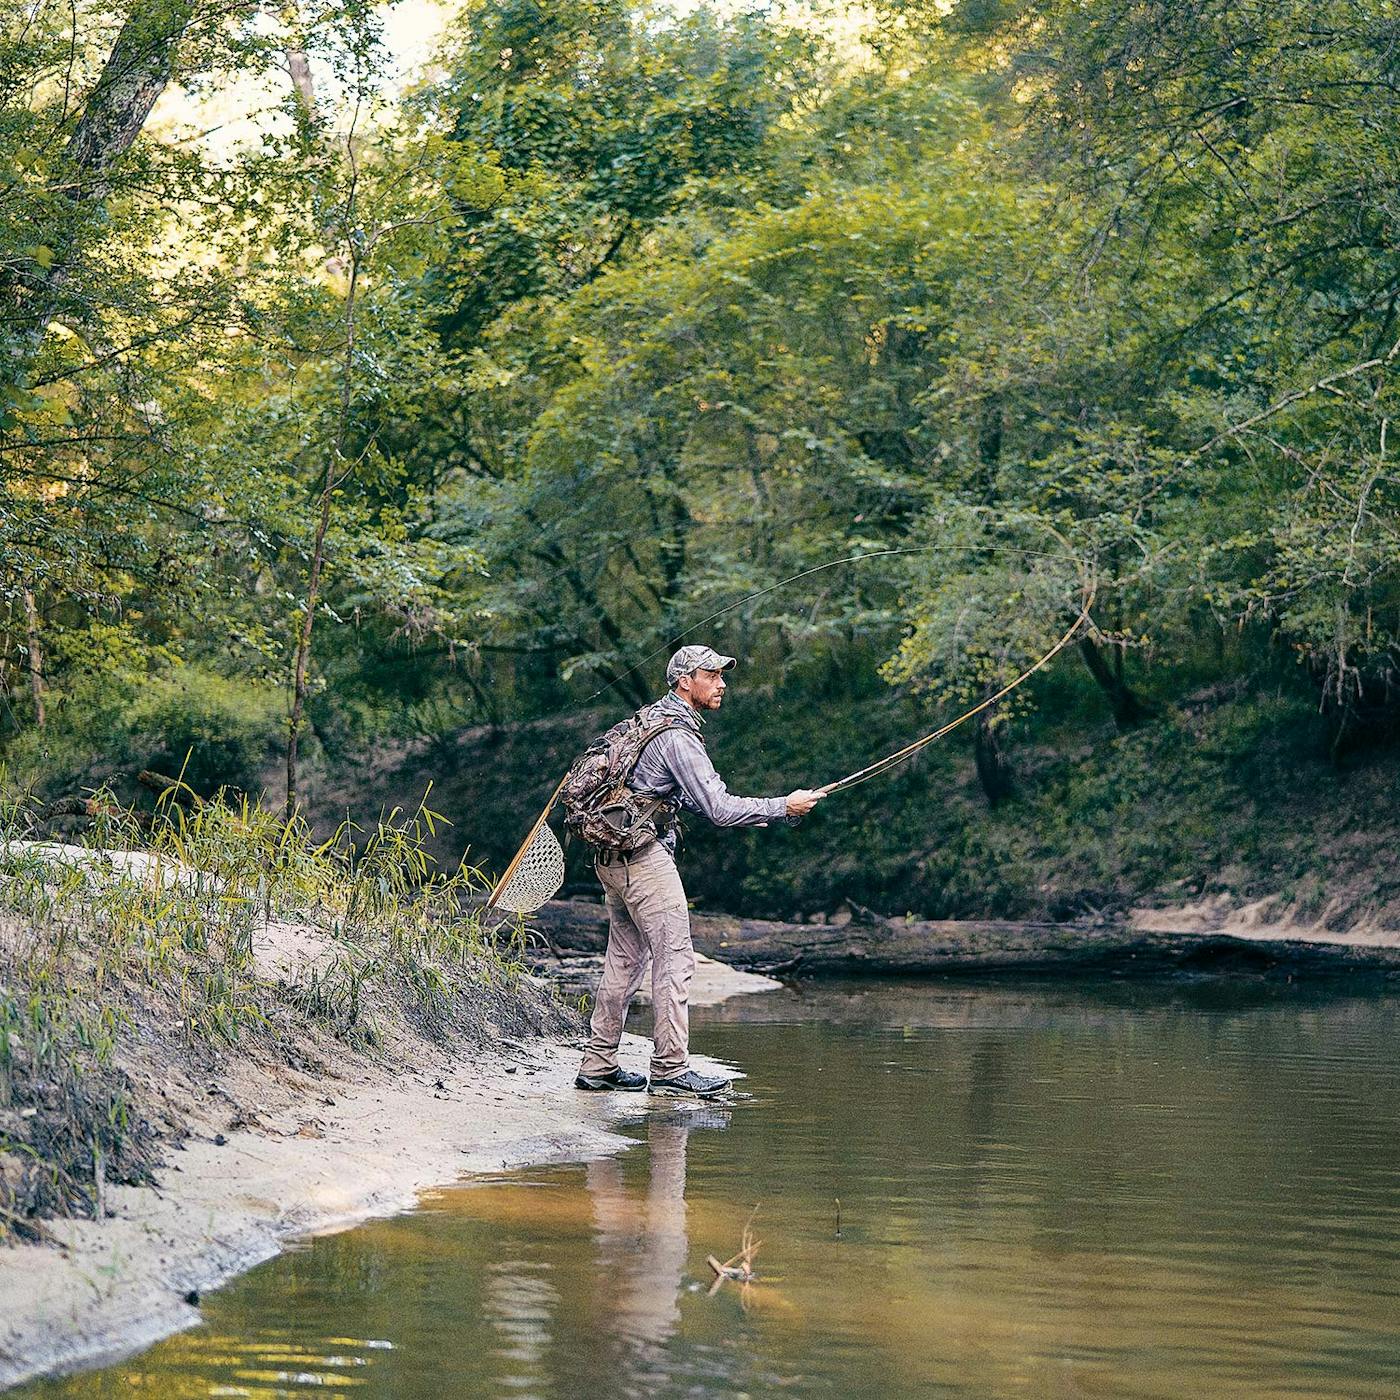 For Crowd Free Fly Fishing Go East